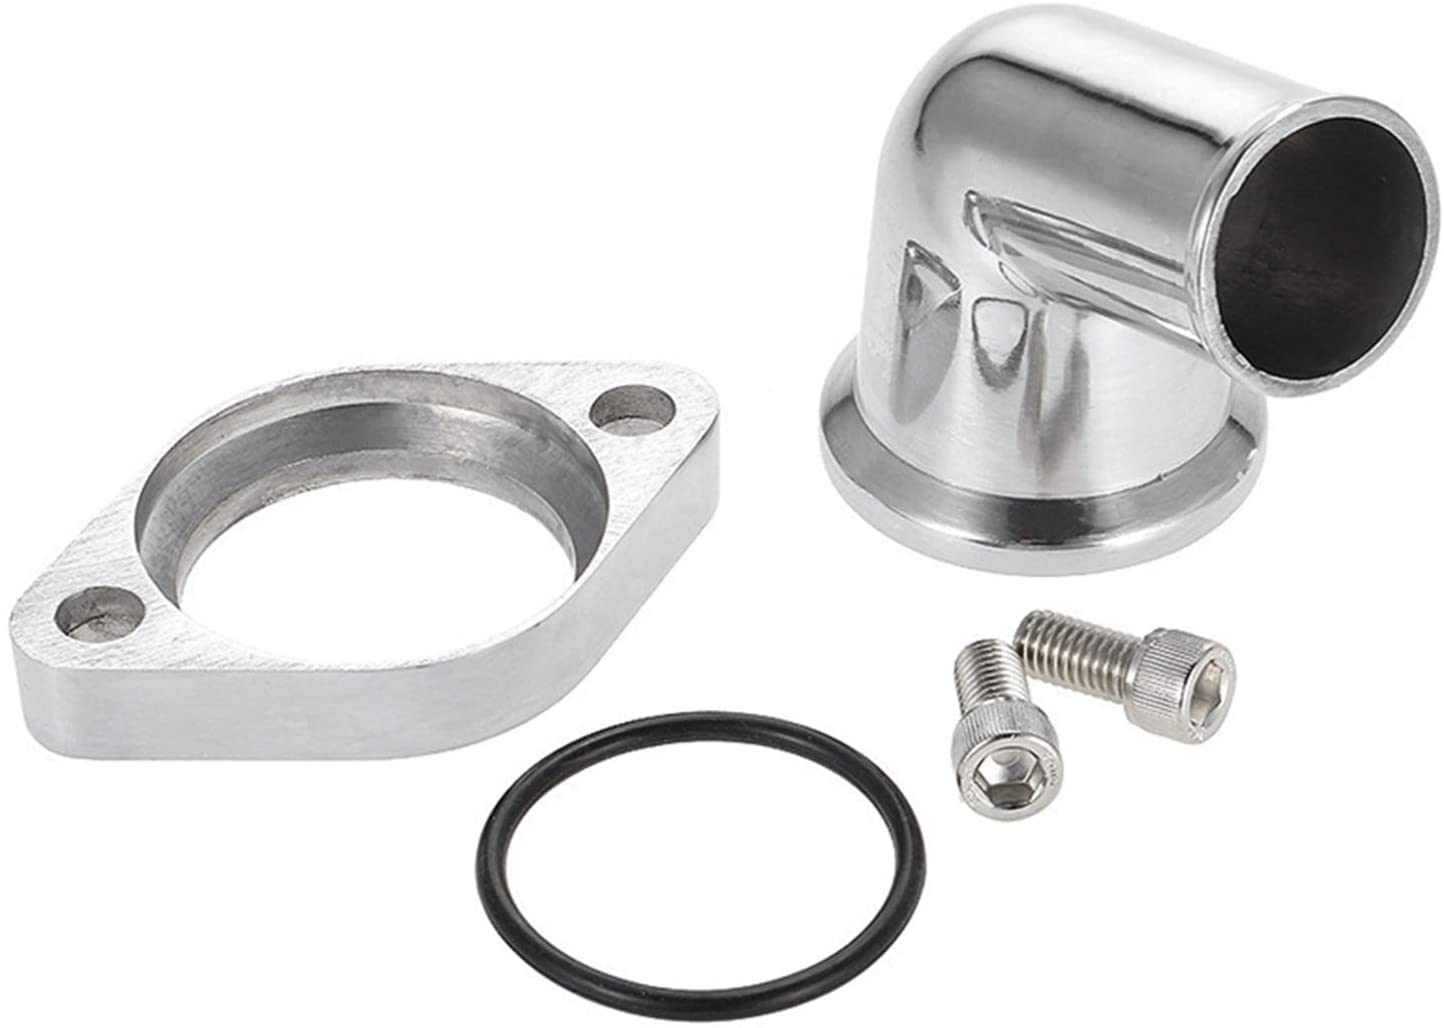 RJJX New Aluminum Water Neck Swivel 15 Degree Fit for Chevy 327 350 454 396 (Color : Silver) (Silver)